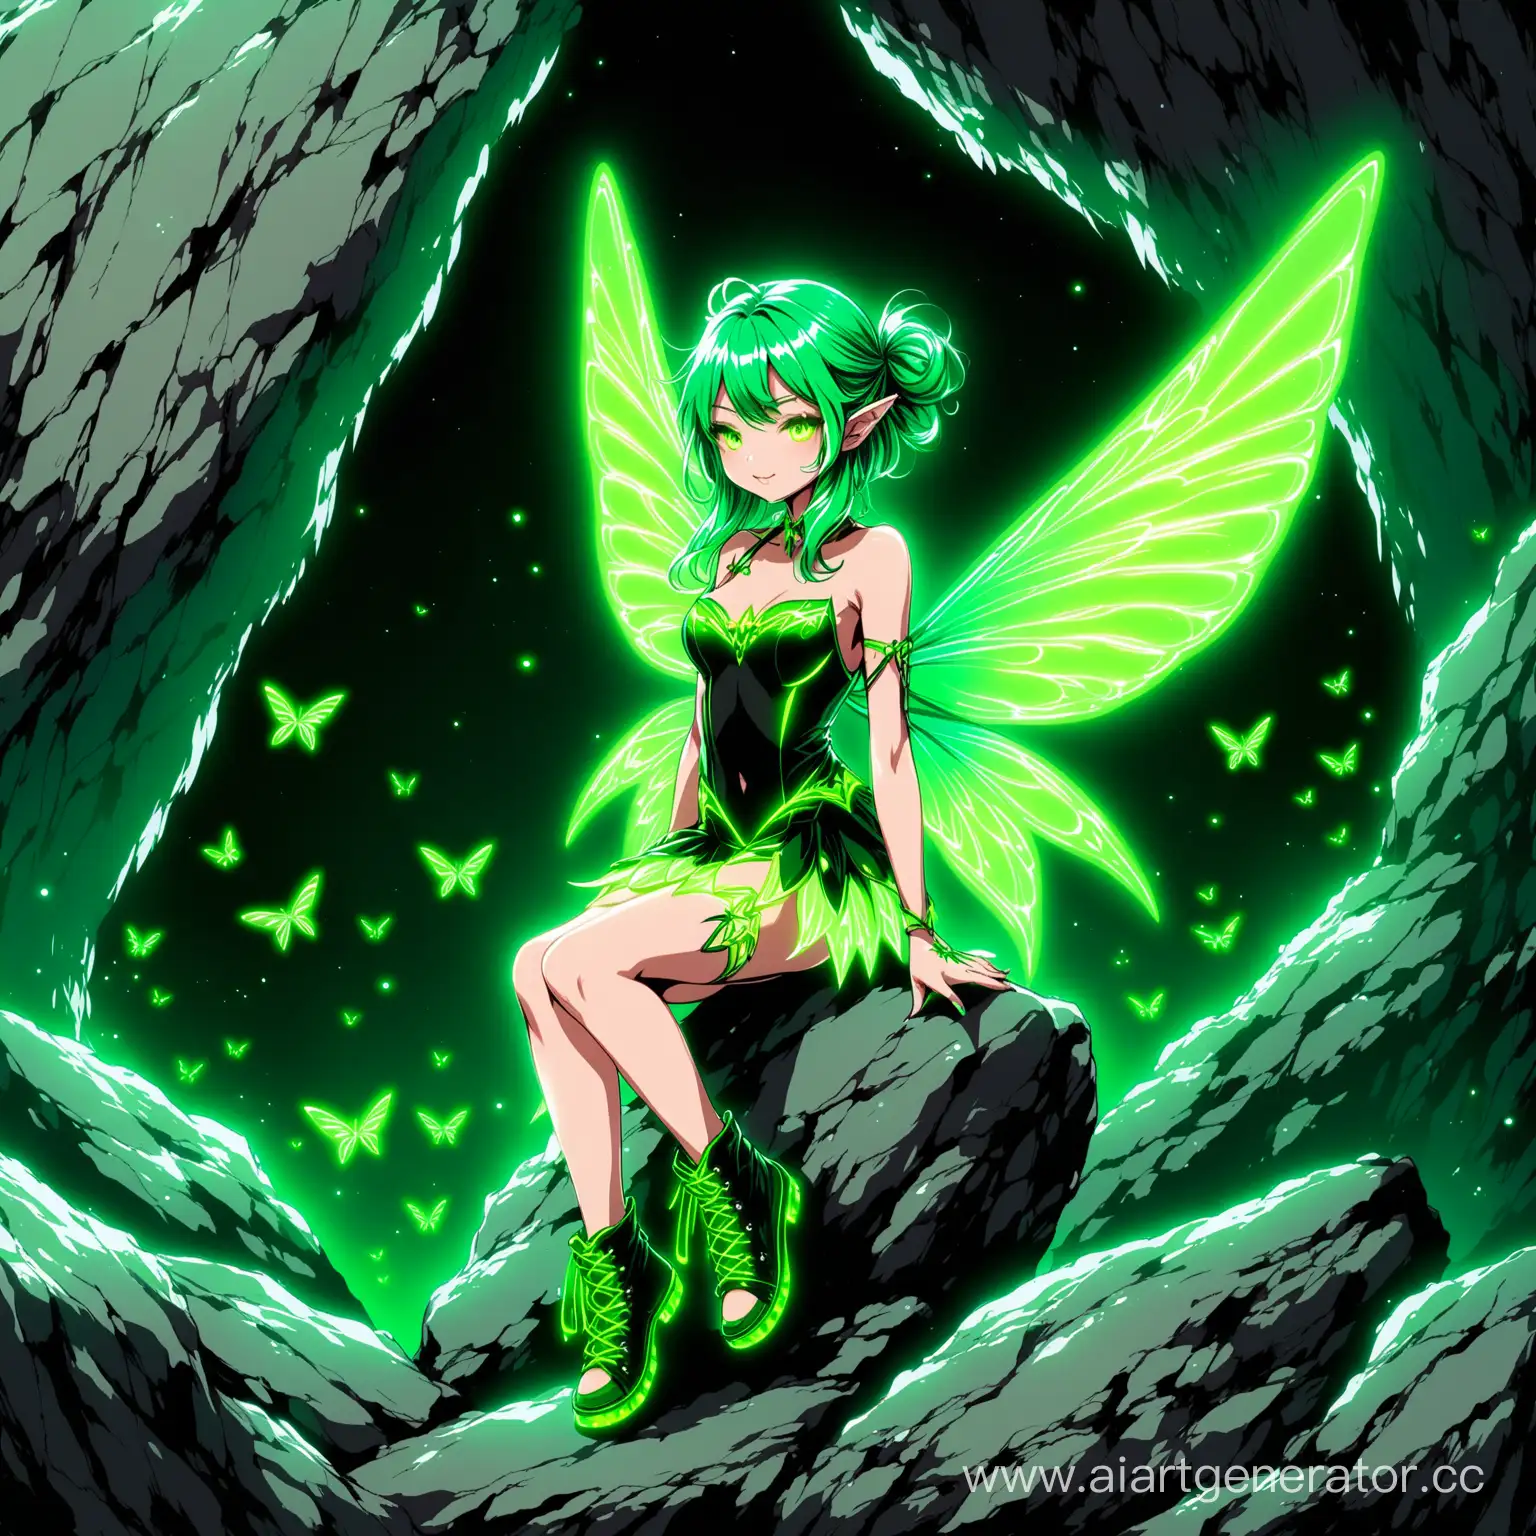 Enchanting-Fairy-with-Green-Neon-Wings-Amidst-Rock-Formation